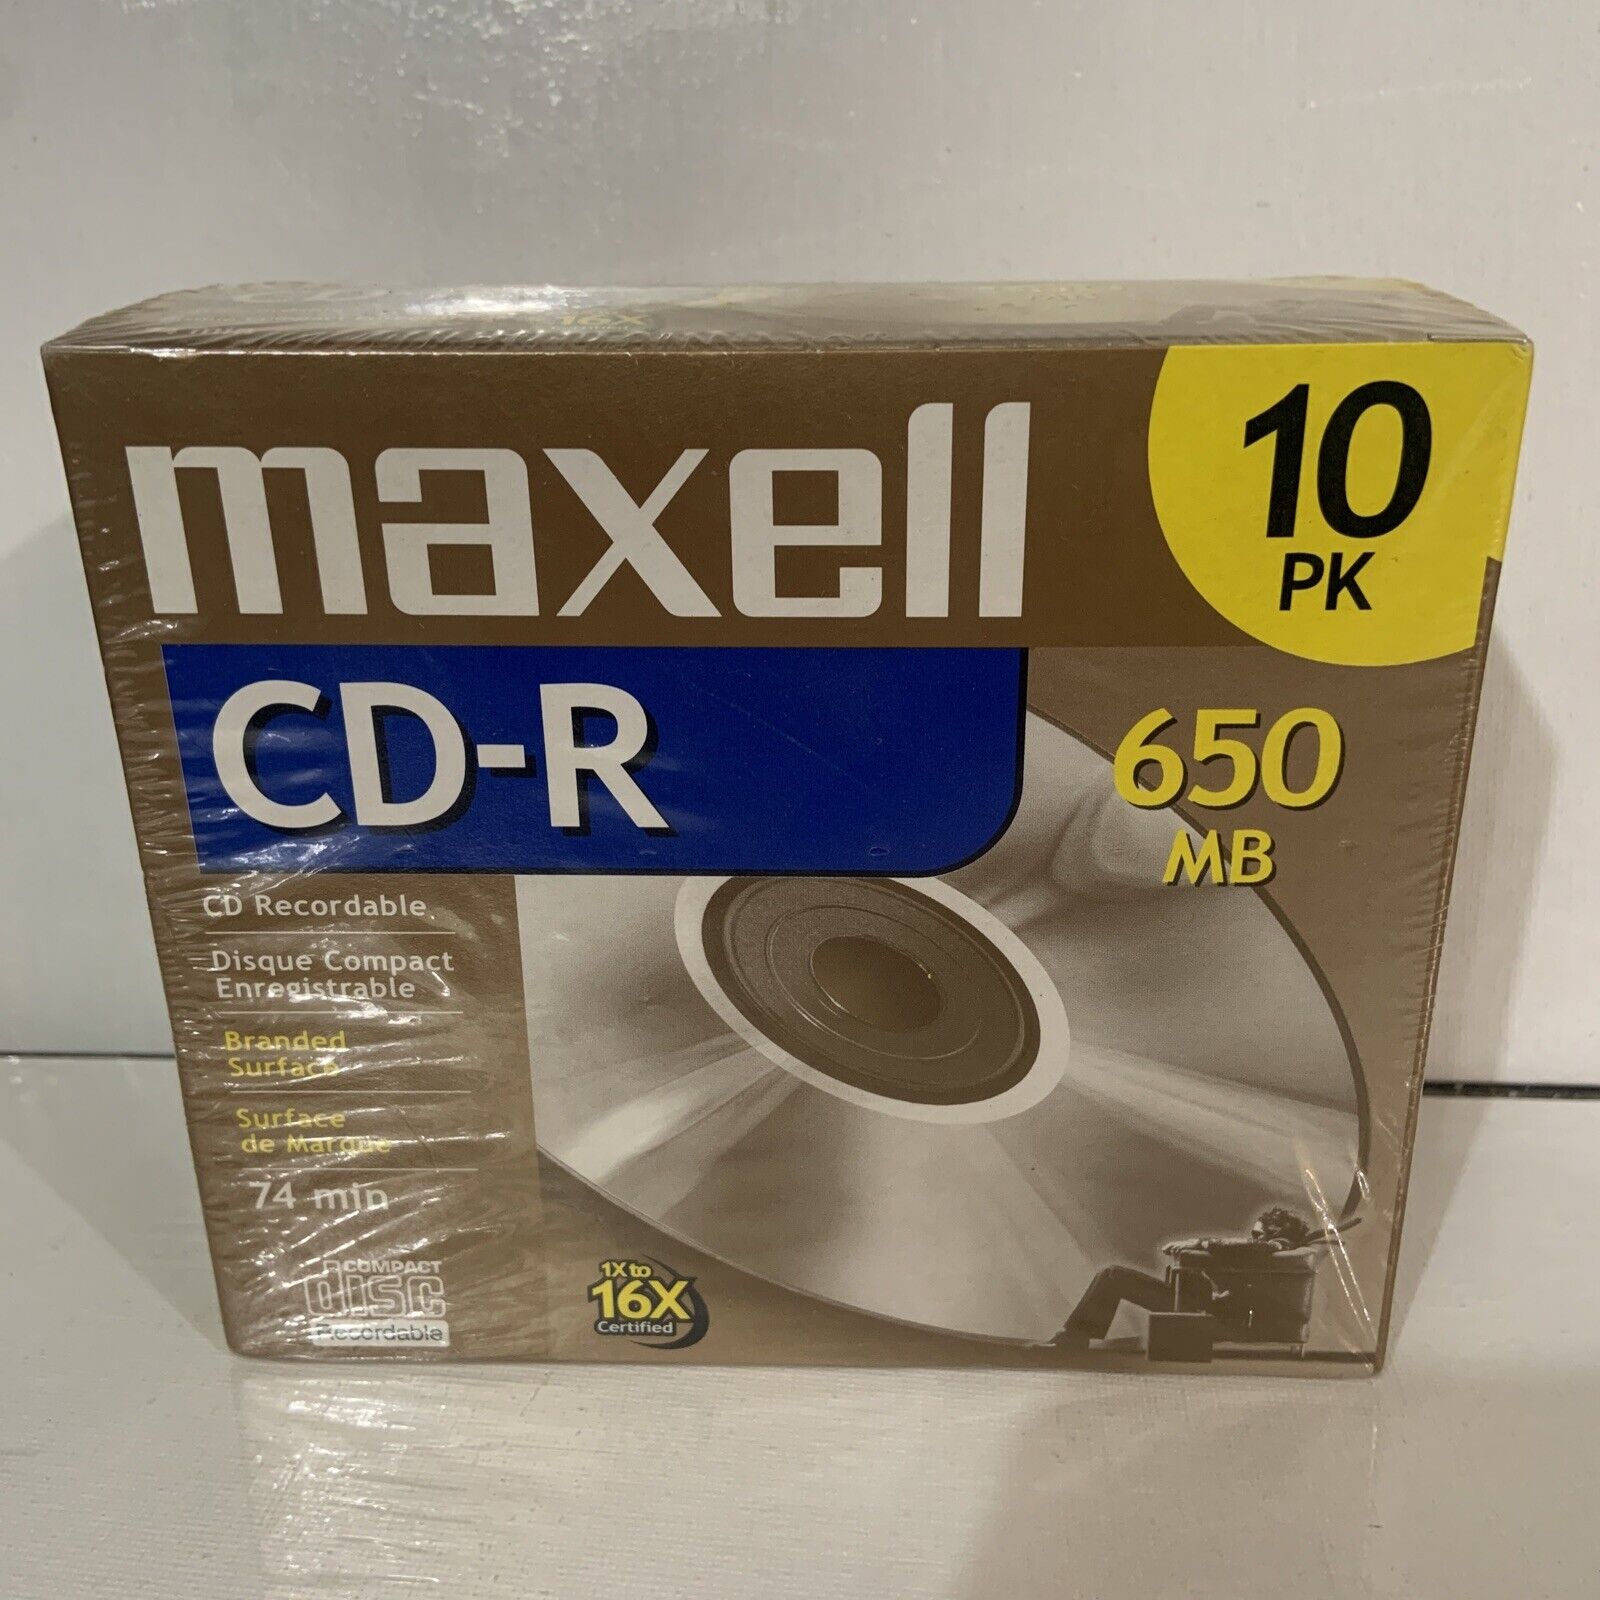 New MAXELL CD-Recordable 650MB/74 Min/1X to 16X/10 PK Disc - 